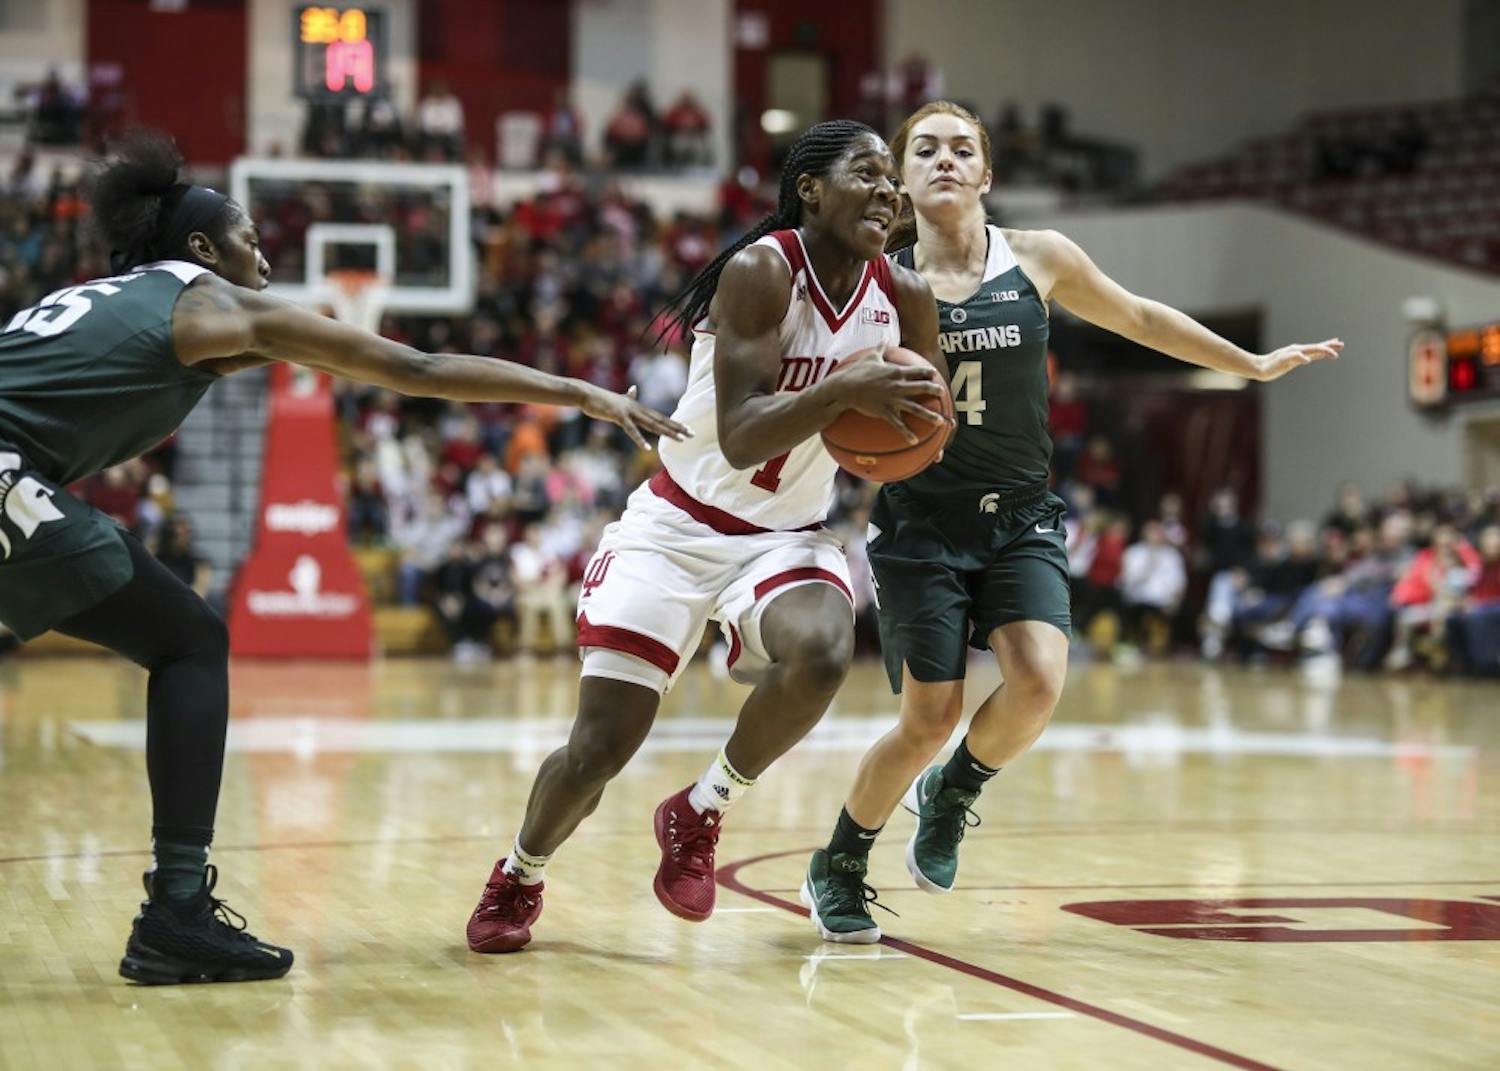 Then-freshman guard Bendu Yeaney charges the basket during the IU's game against Michigan State on Dec. 28, 2017, at Simon Skjodt Assembly Hall. Since losing 68-46 in this game, the Hoosiers have won two straight against the Spartans.&nbsp;